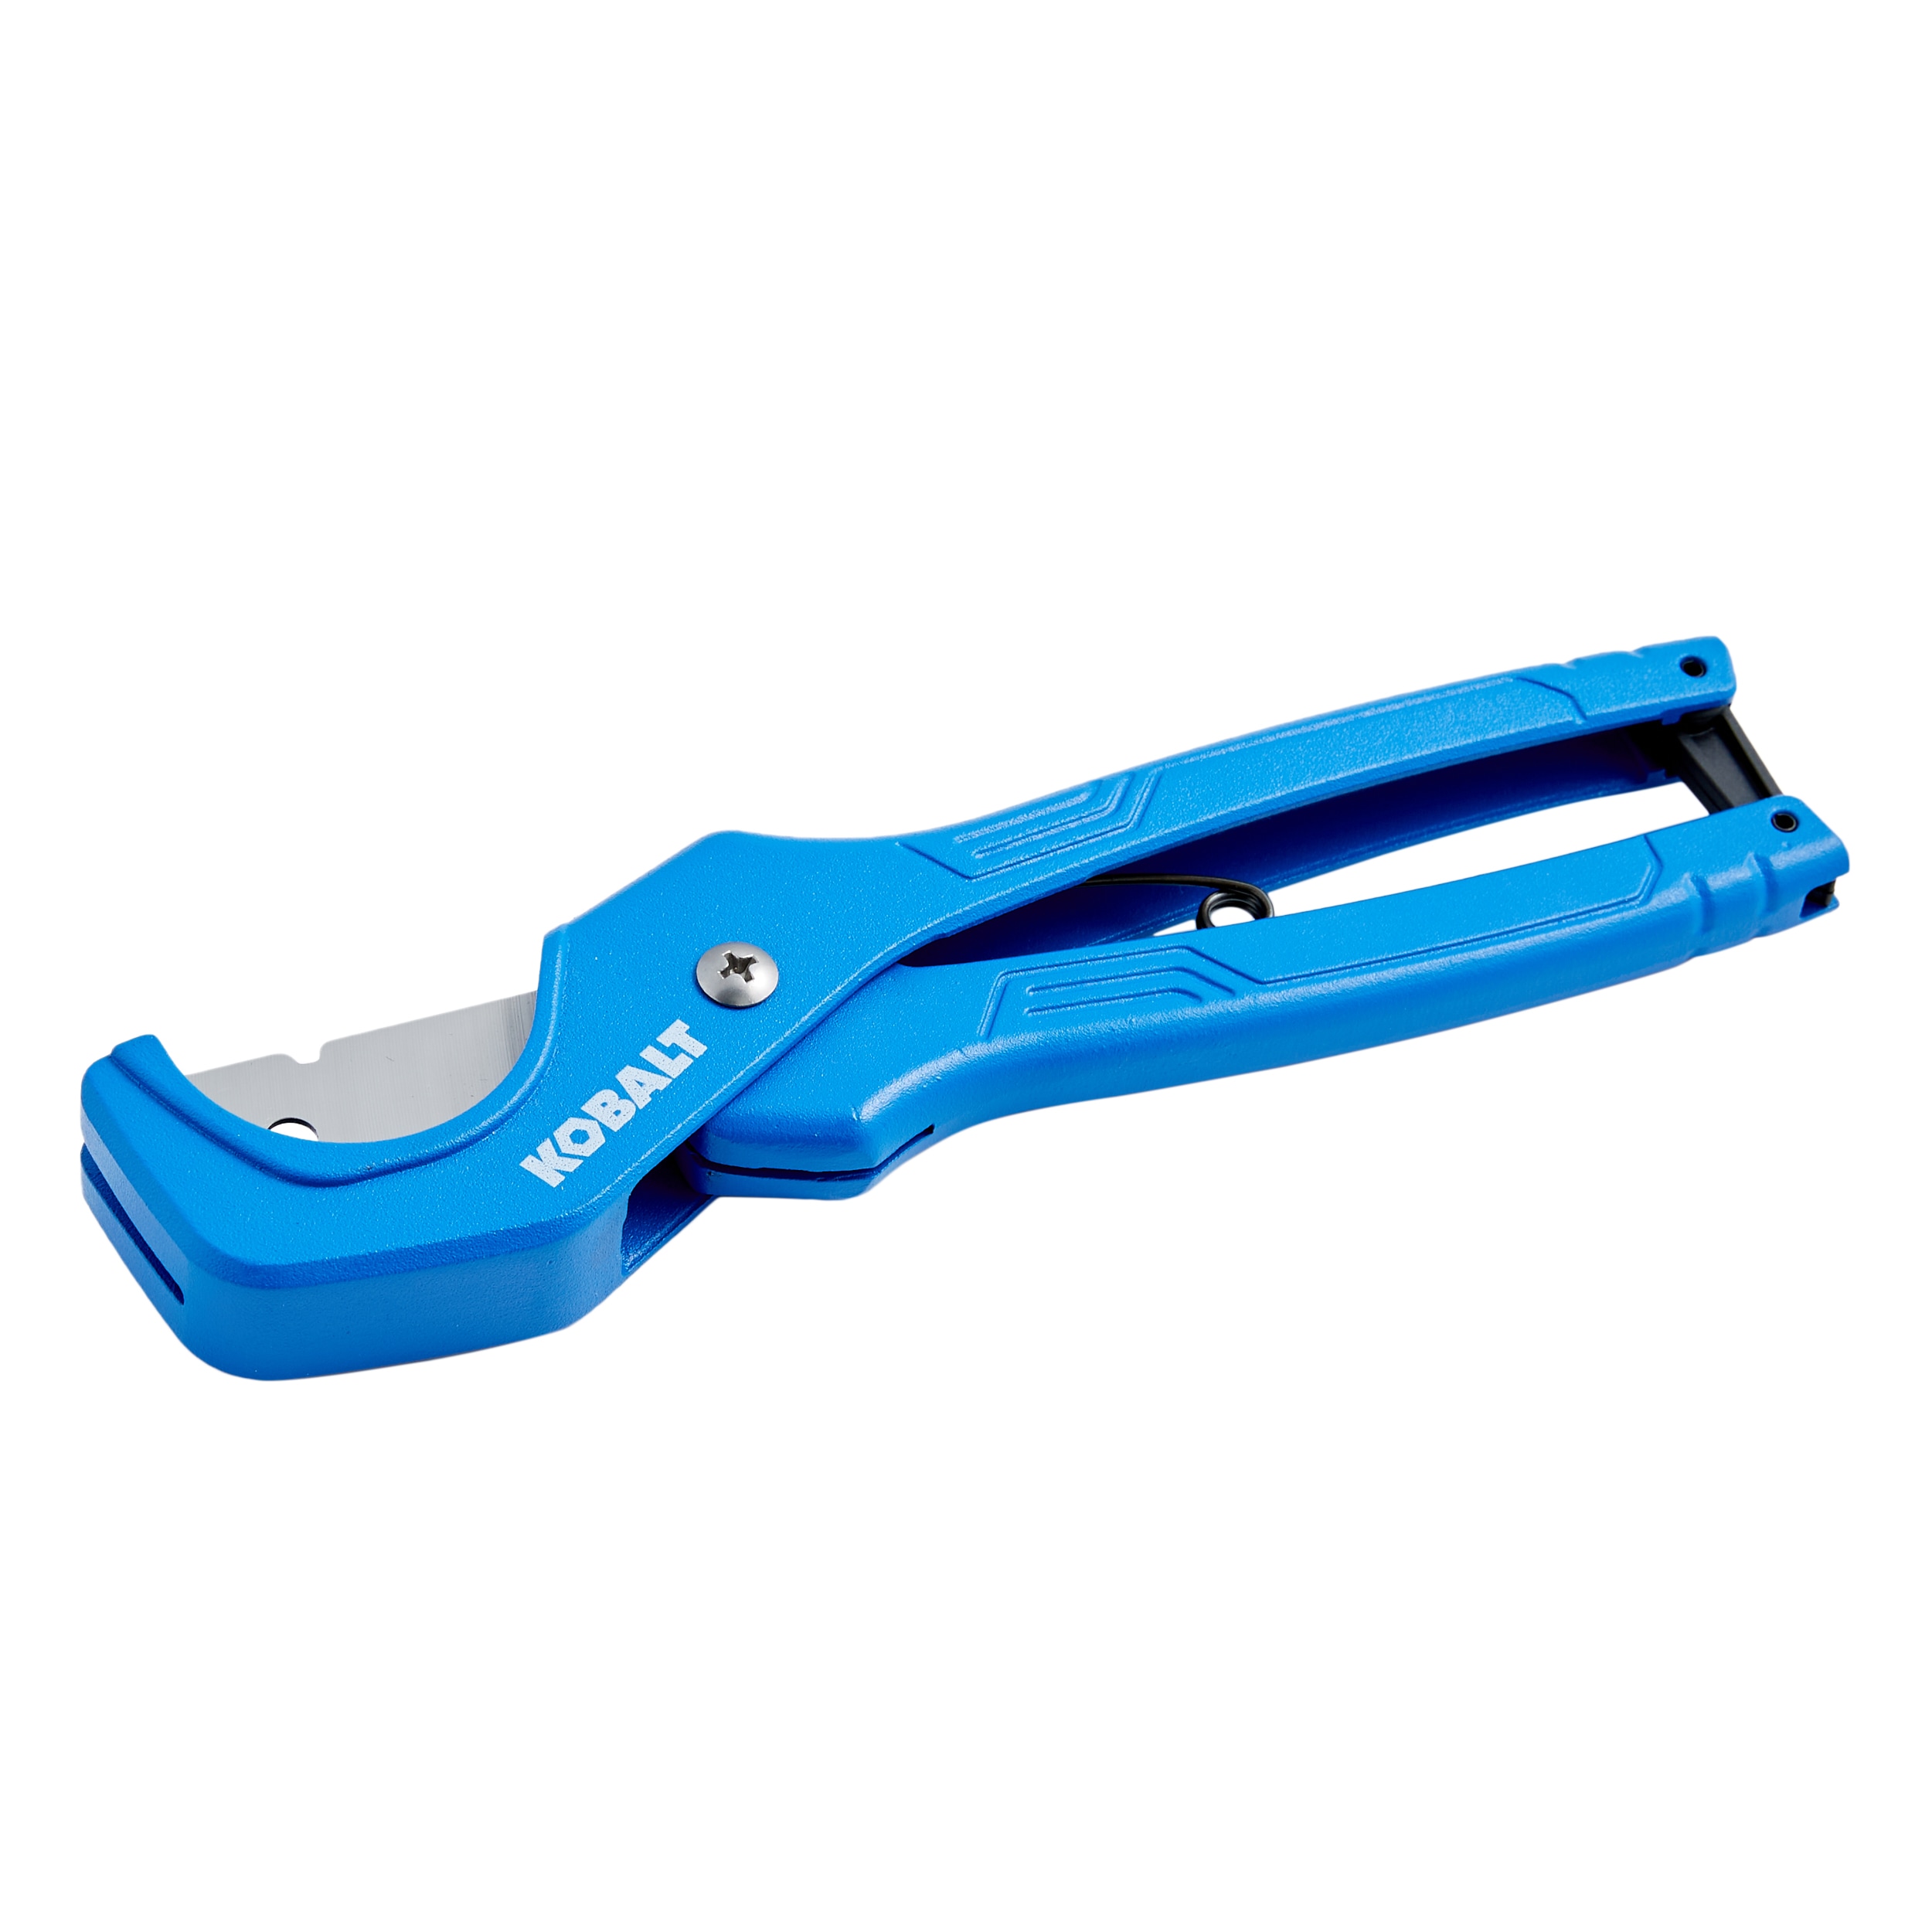 CPVC Plastic Pipe Cutter 1/2 to 1-5/8 OD (MCC)Best Quality - ARGCO